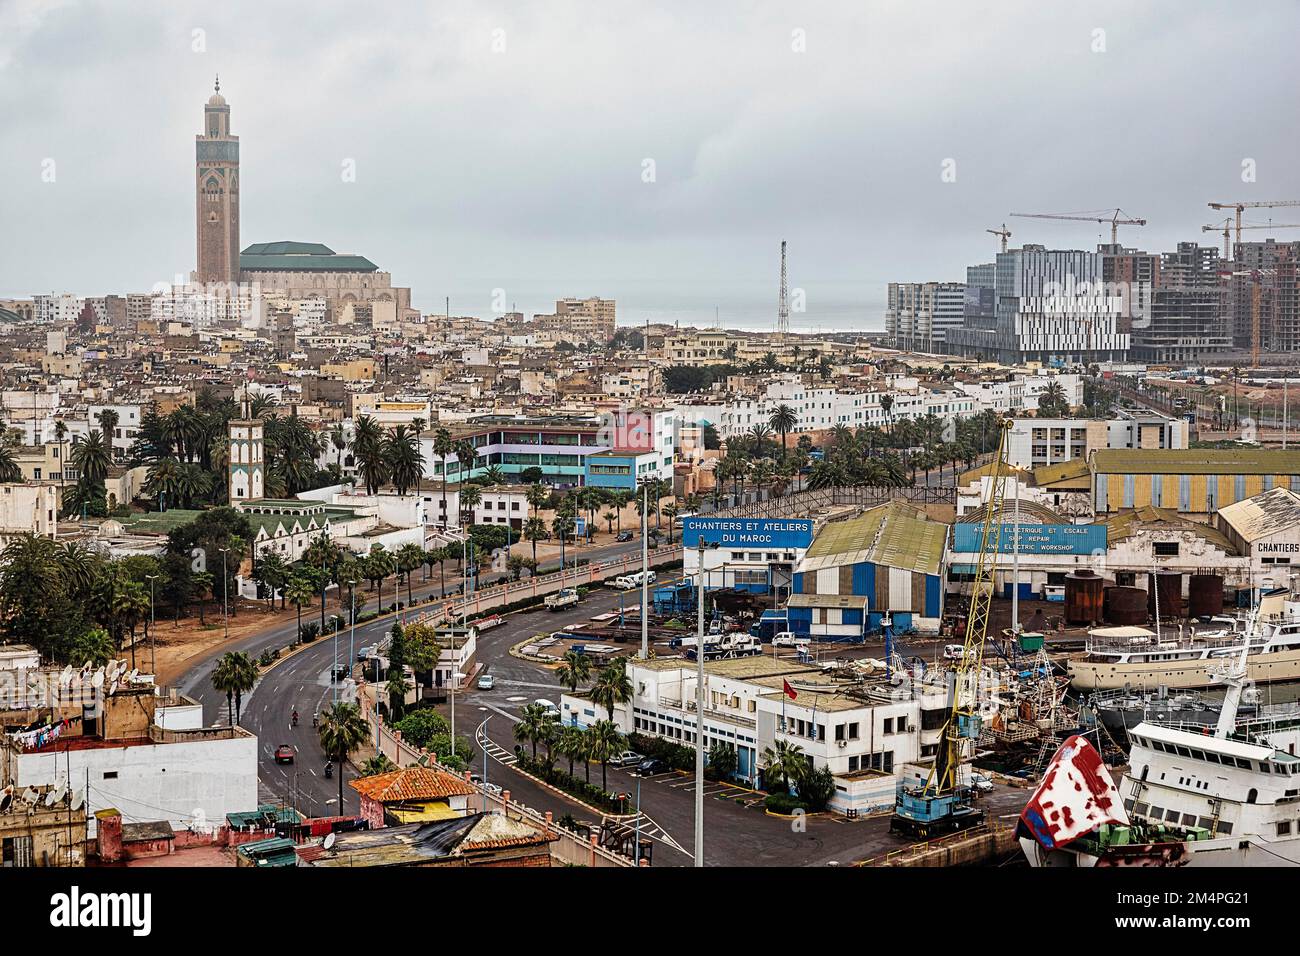 Casablanca skyline, panoramic view with the Hassan II Mosque, dreary weather, view from above, Casablanca, Morocco Stock Photo